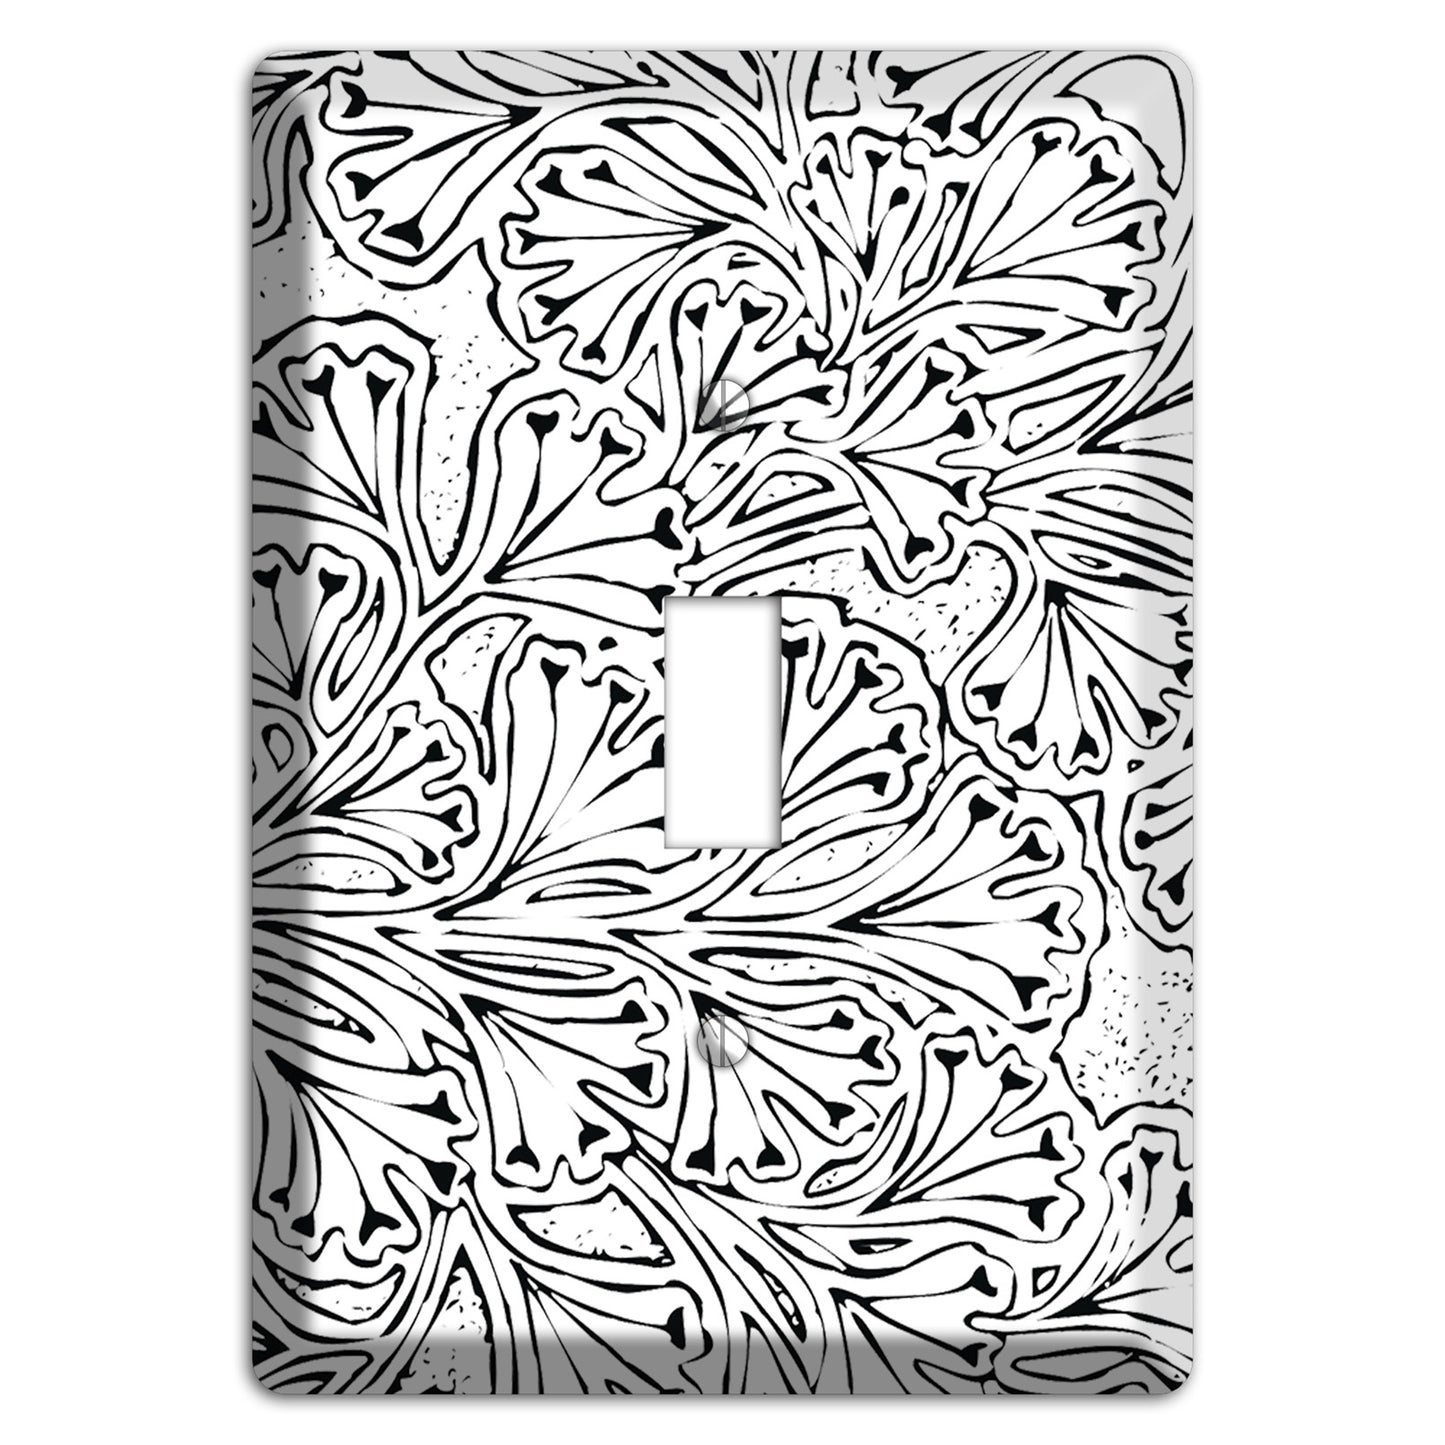 Deco White with Black Interlocking Floral Cover Plates